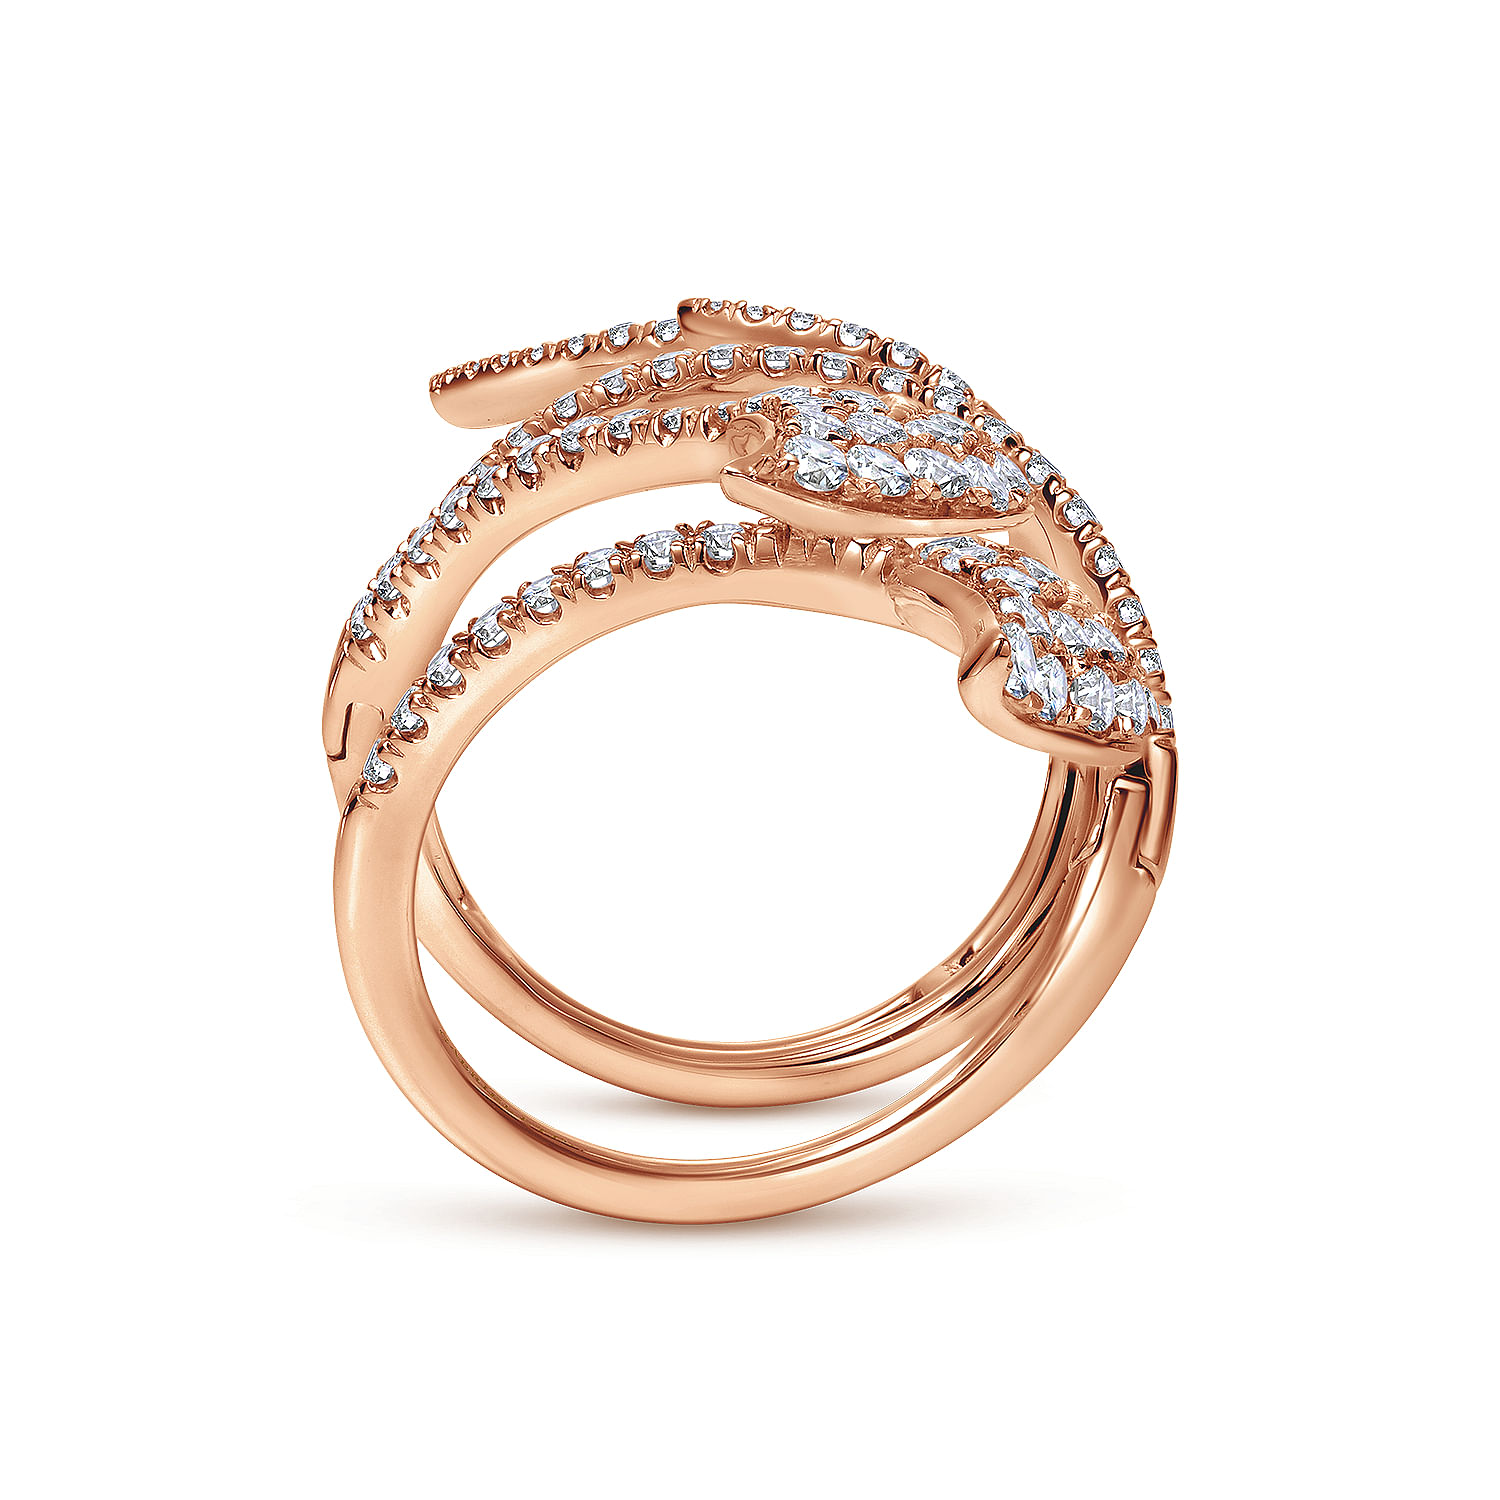 18K Rose Gold Long Wrapping Pavé Diamond Leaf Statement Ring